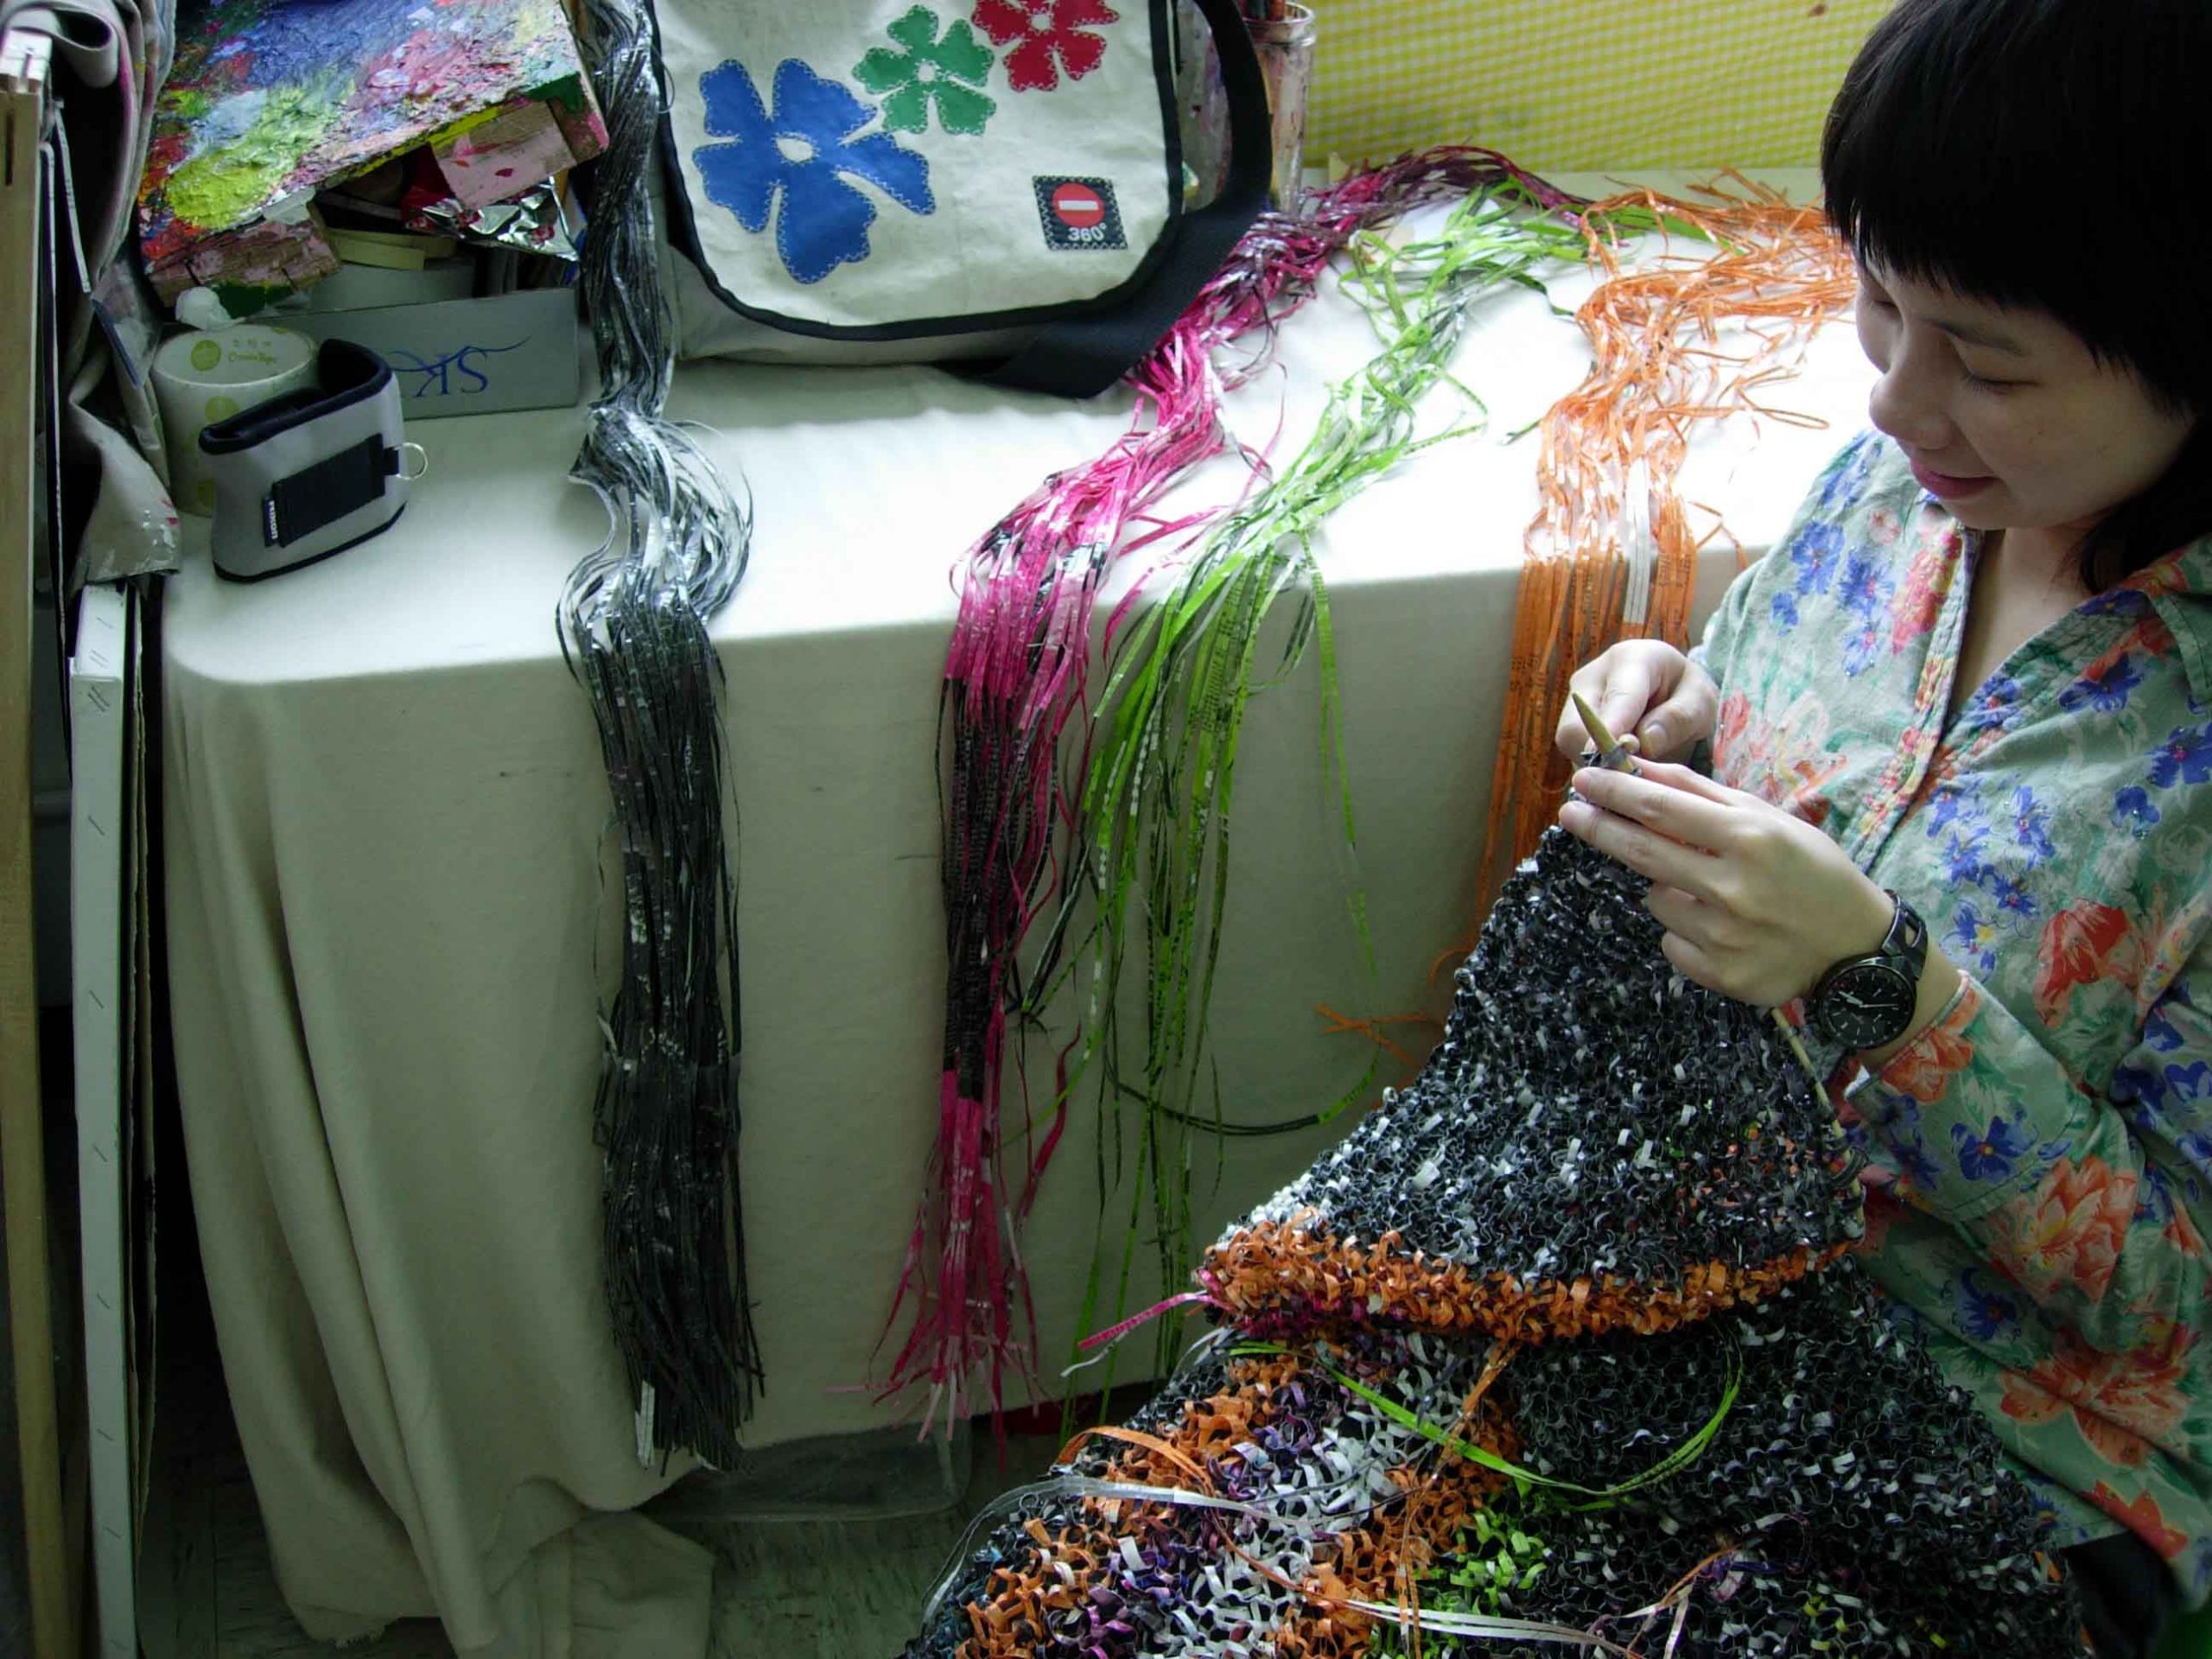 Movana Chen in the process of making her artwork.